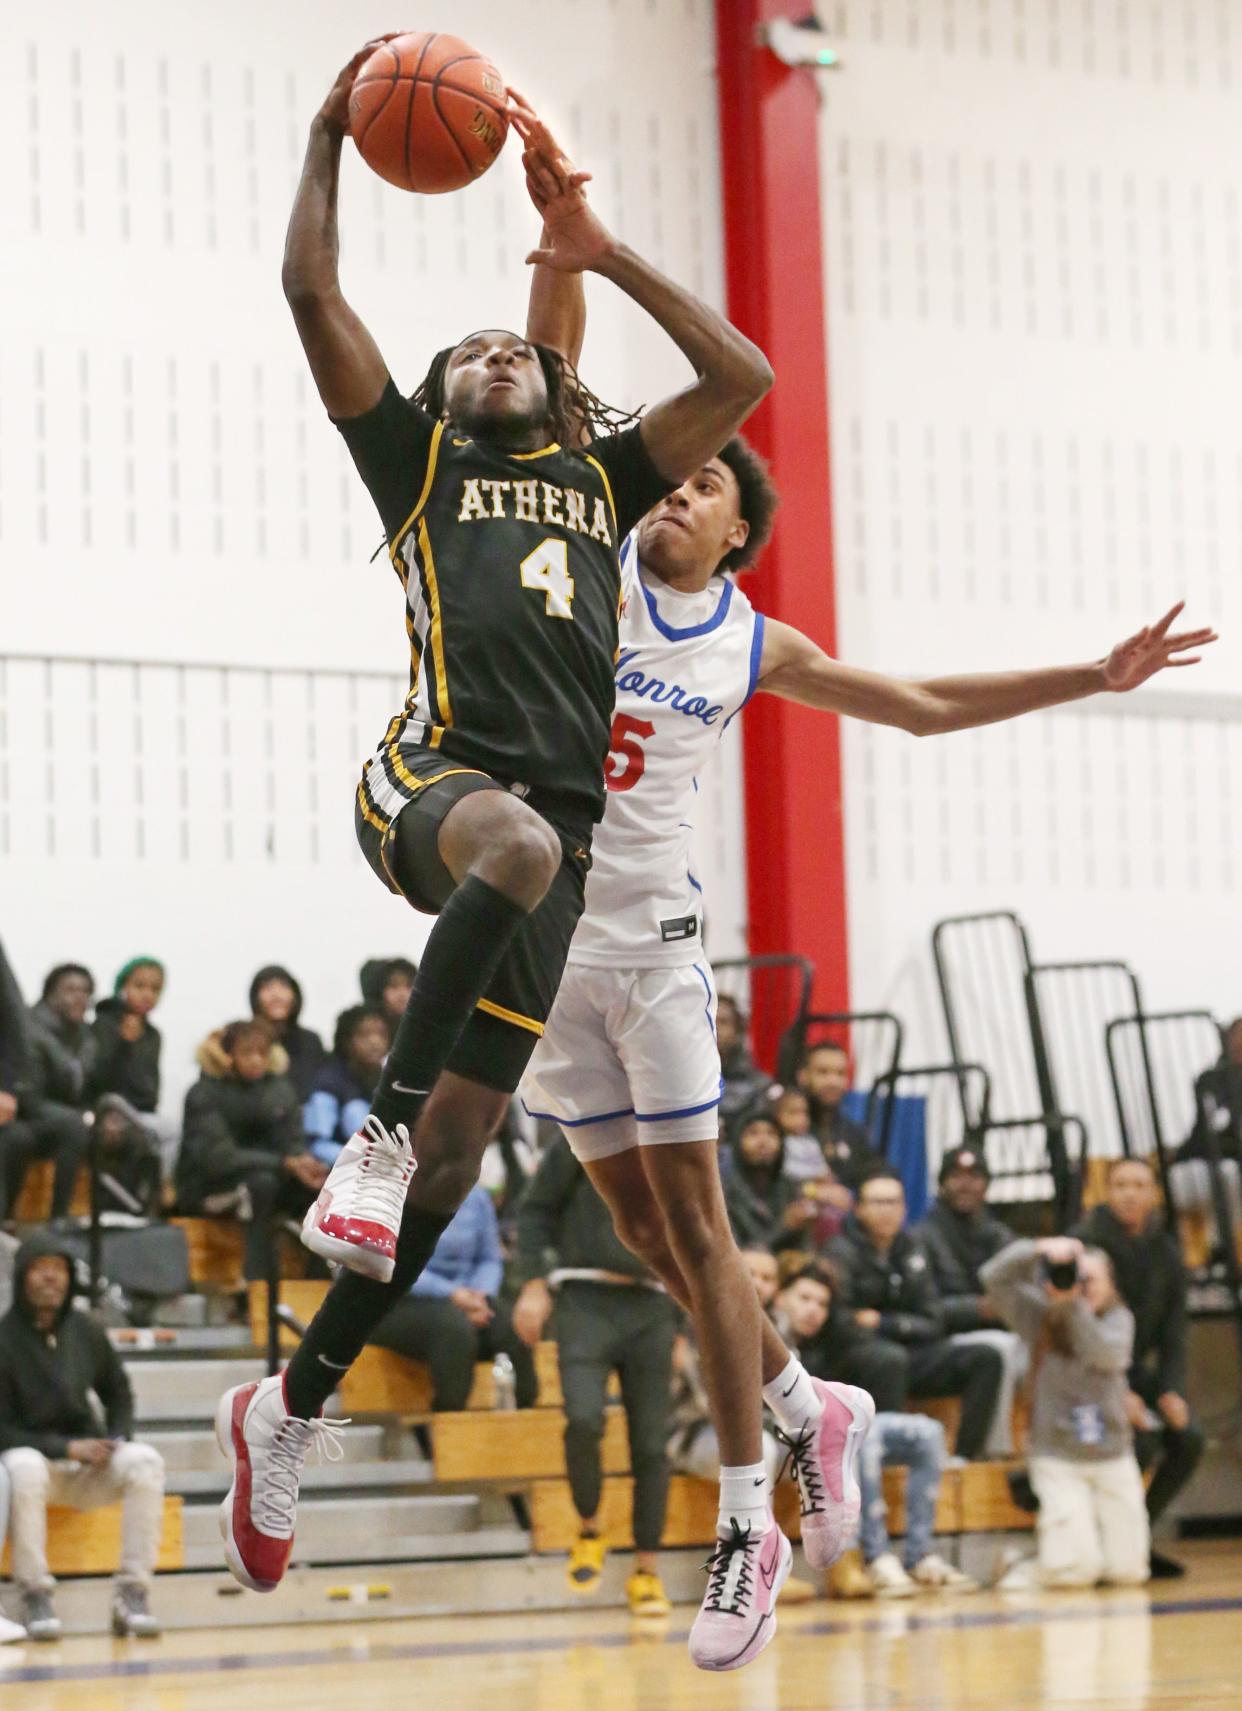 Greece Athena's Zacarr Johnson is fouled by Monroe's Marcus Freeman as he drives to the basket on a fast break in the opening quarter during their Section V boys basketball game Monday, Dec. 18, 2023 at James Monroe High School in Rochester. Athena won the battle of the unbeaten teams, 84-66.